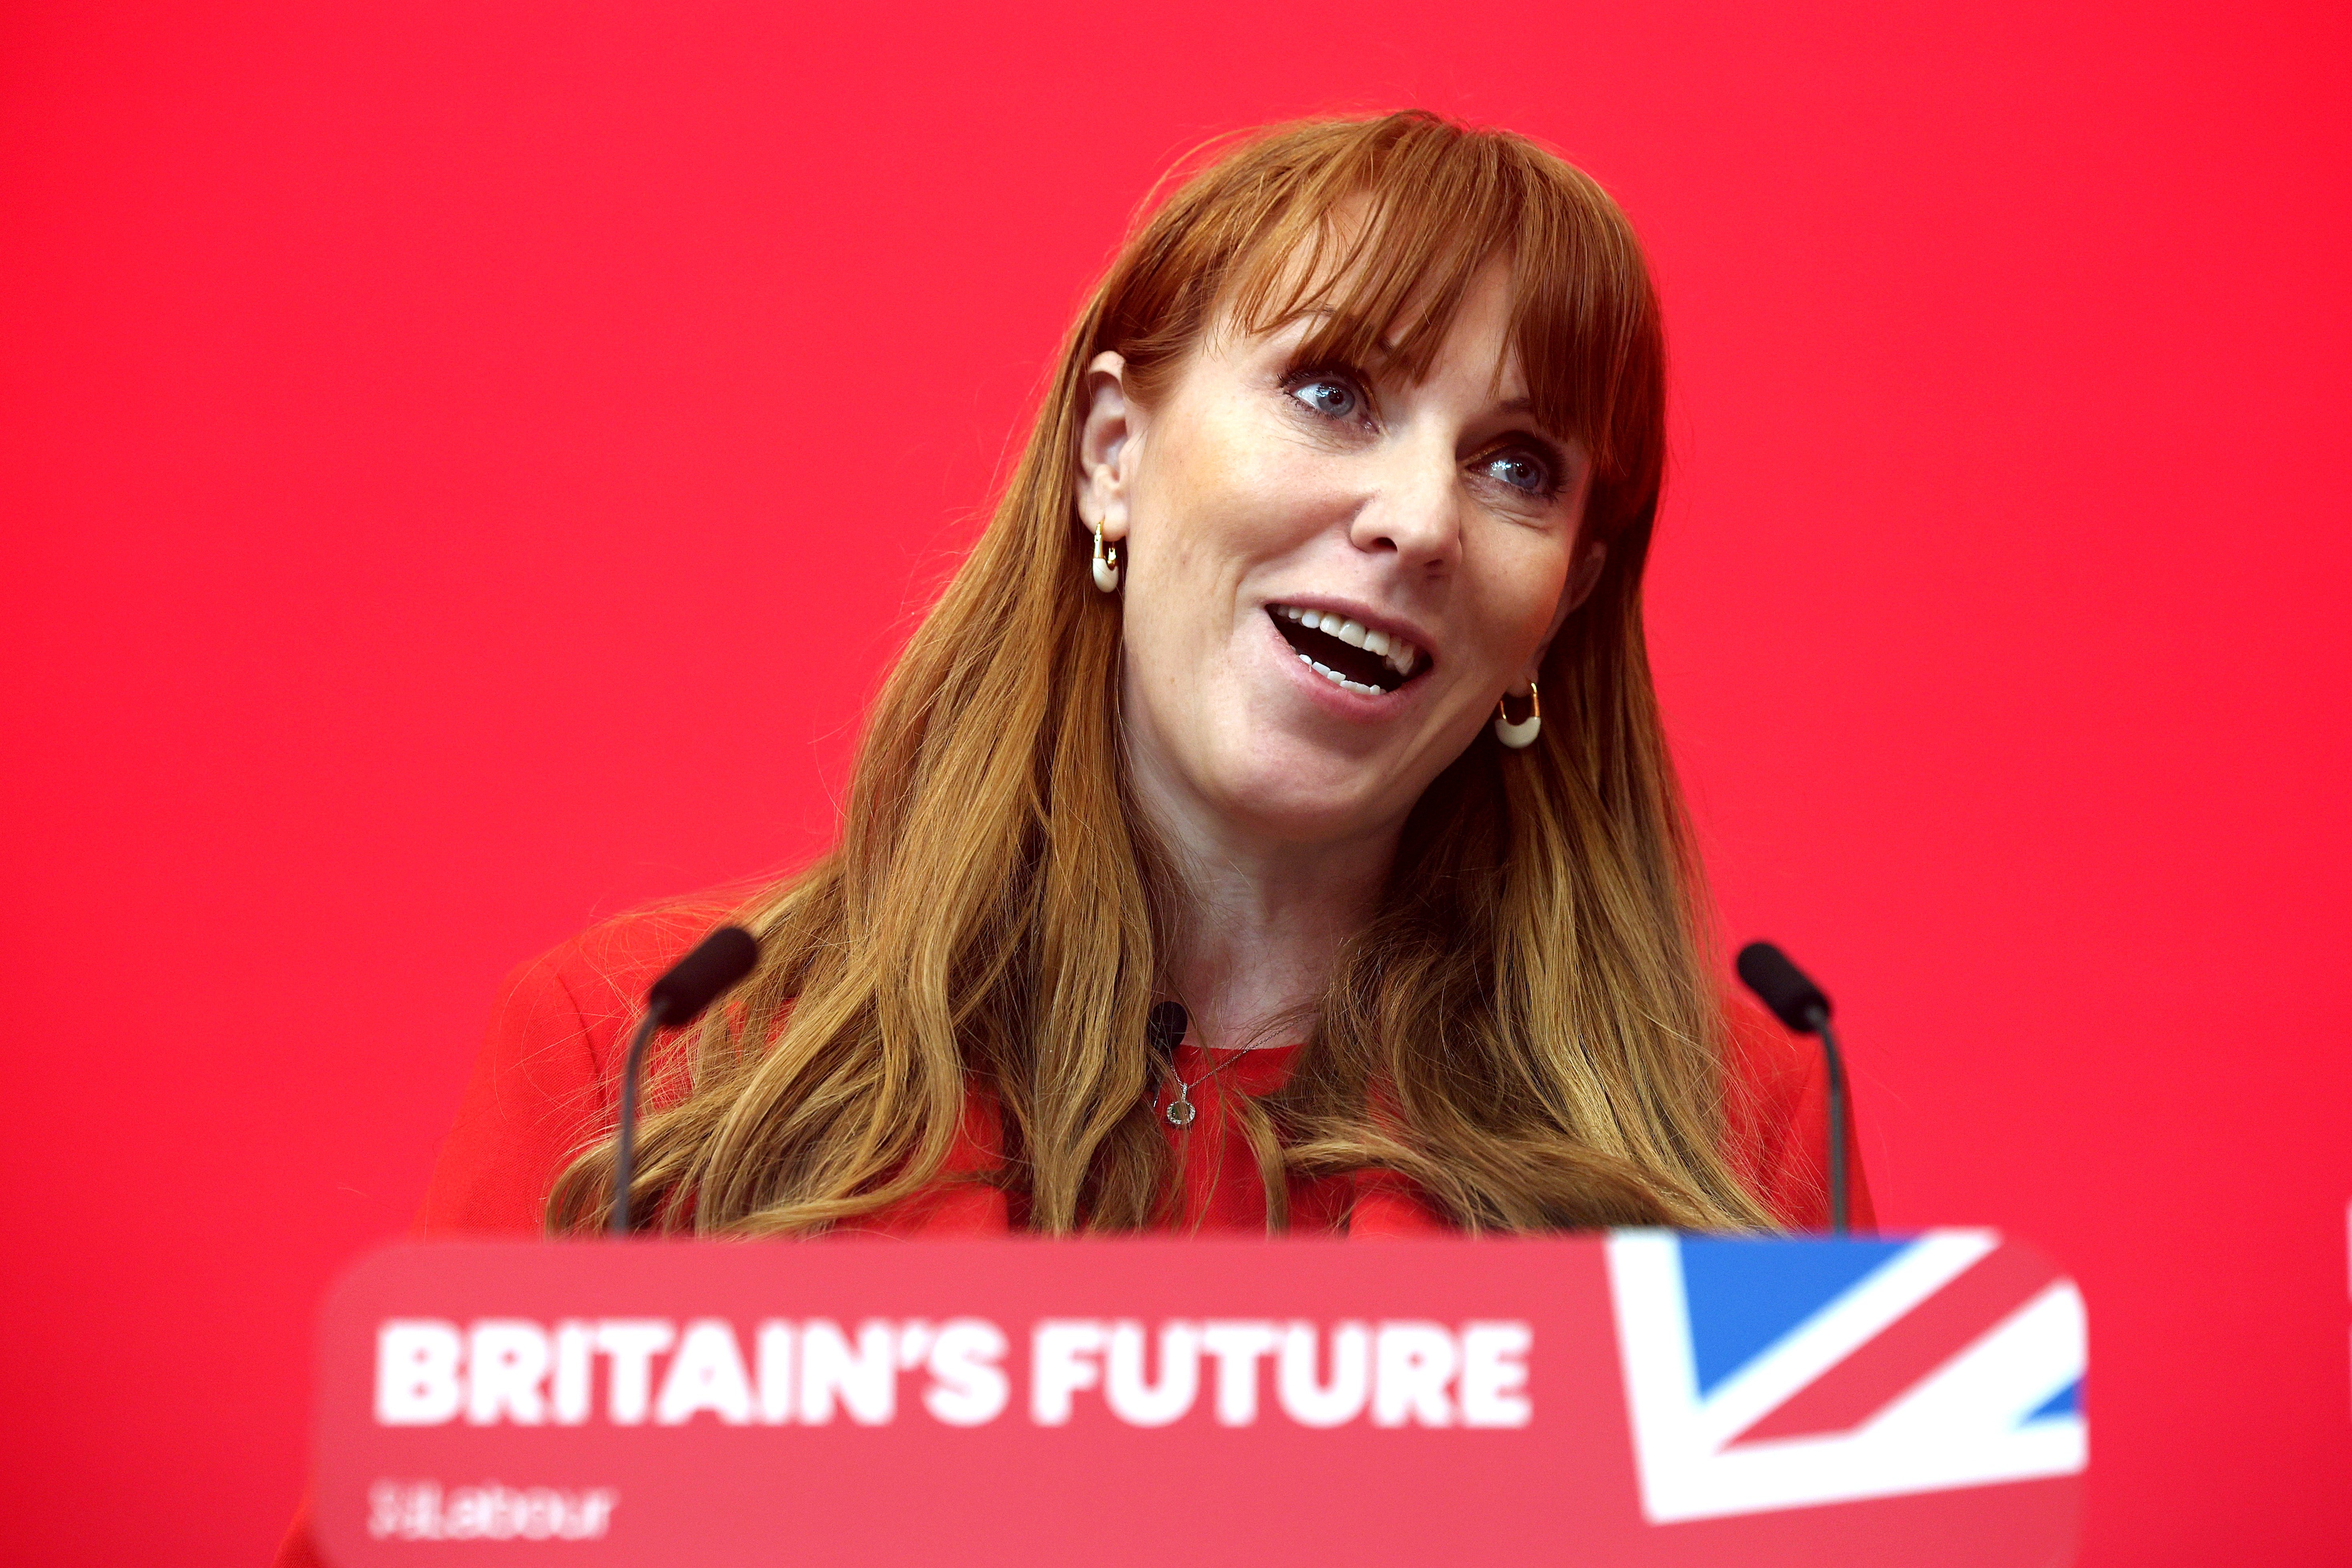 Angela Rayner, Labour’s deputy leader, is ‘simply one of those vivid characters who are more newsworthy whatever they do’